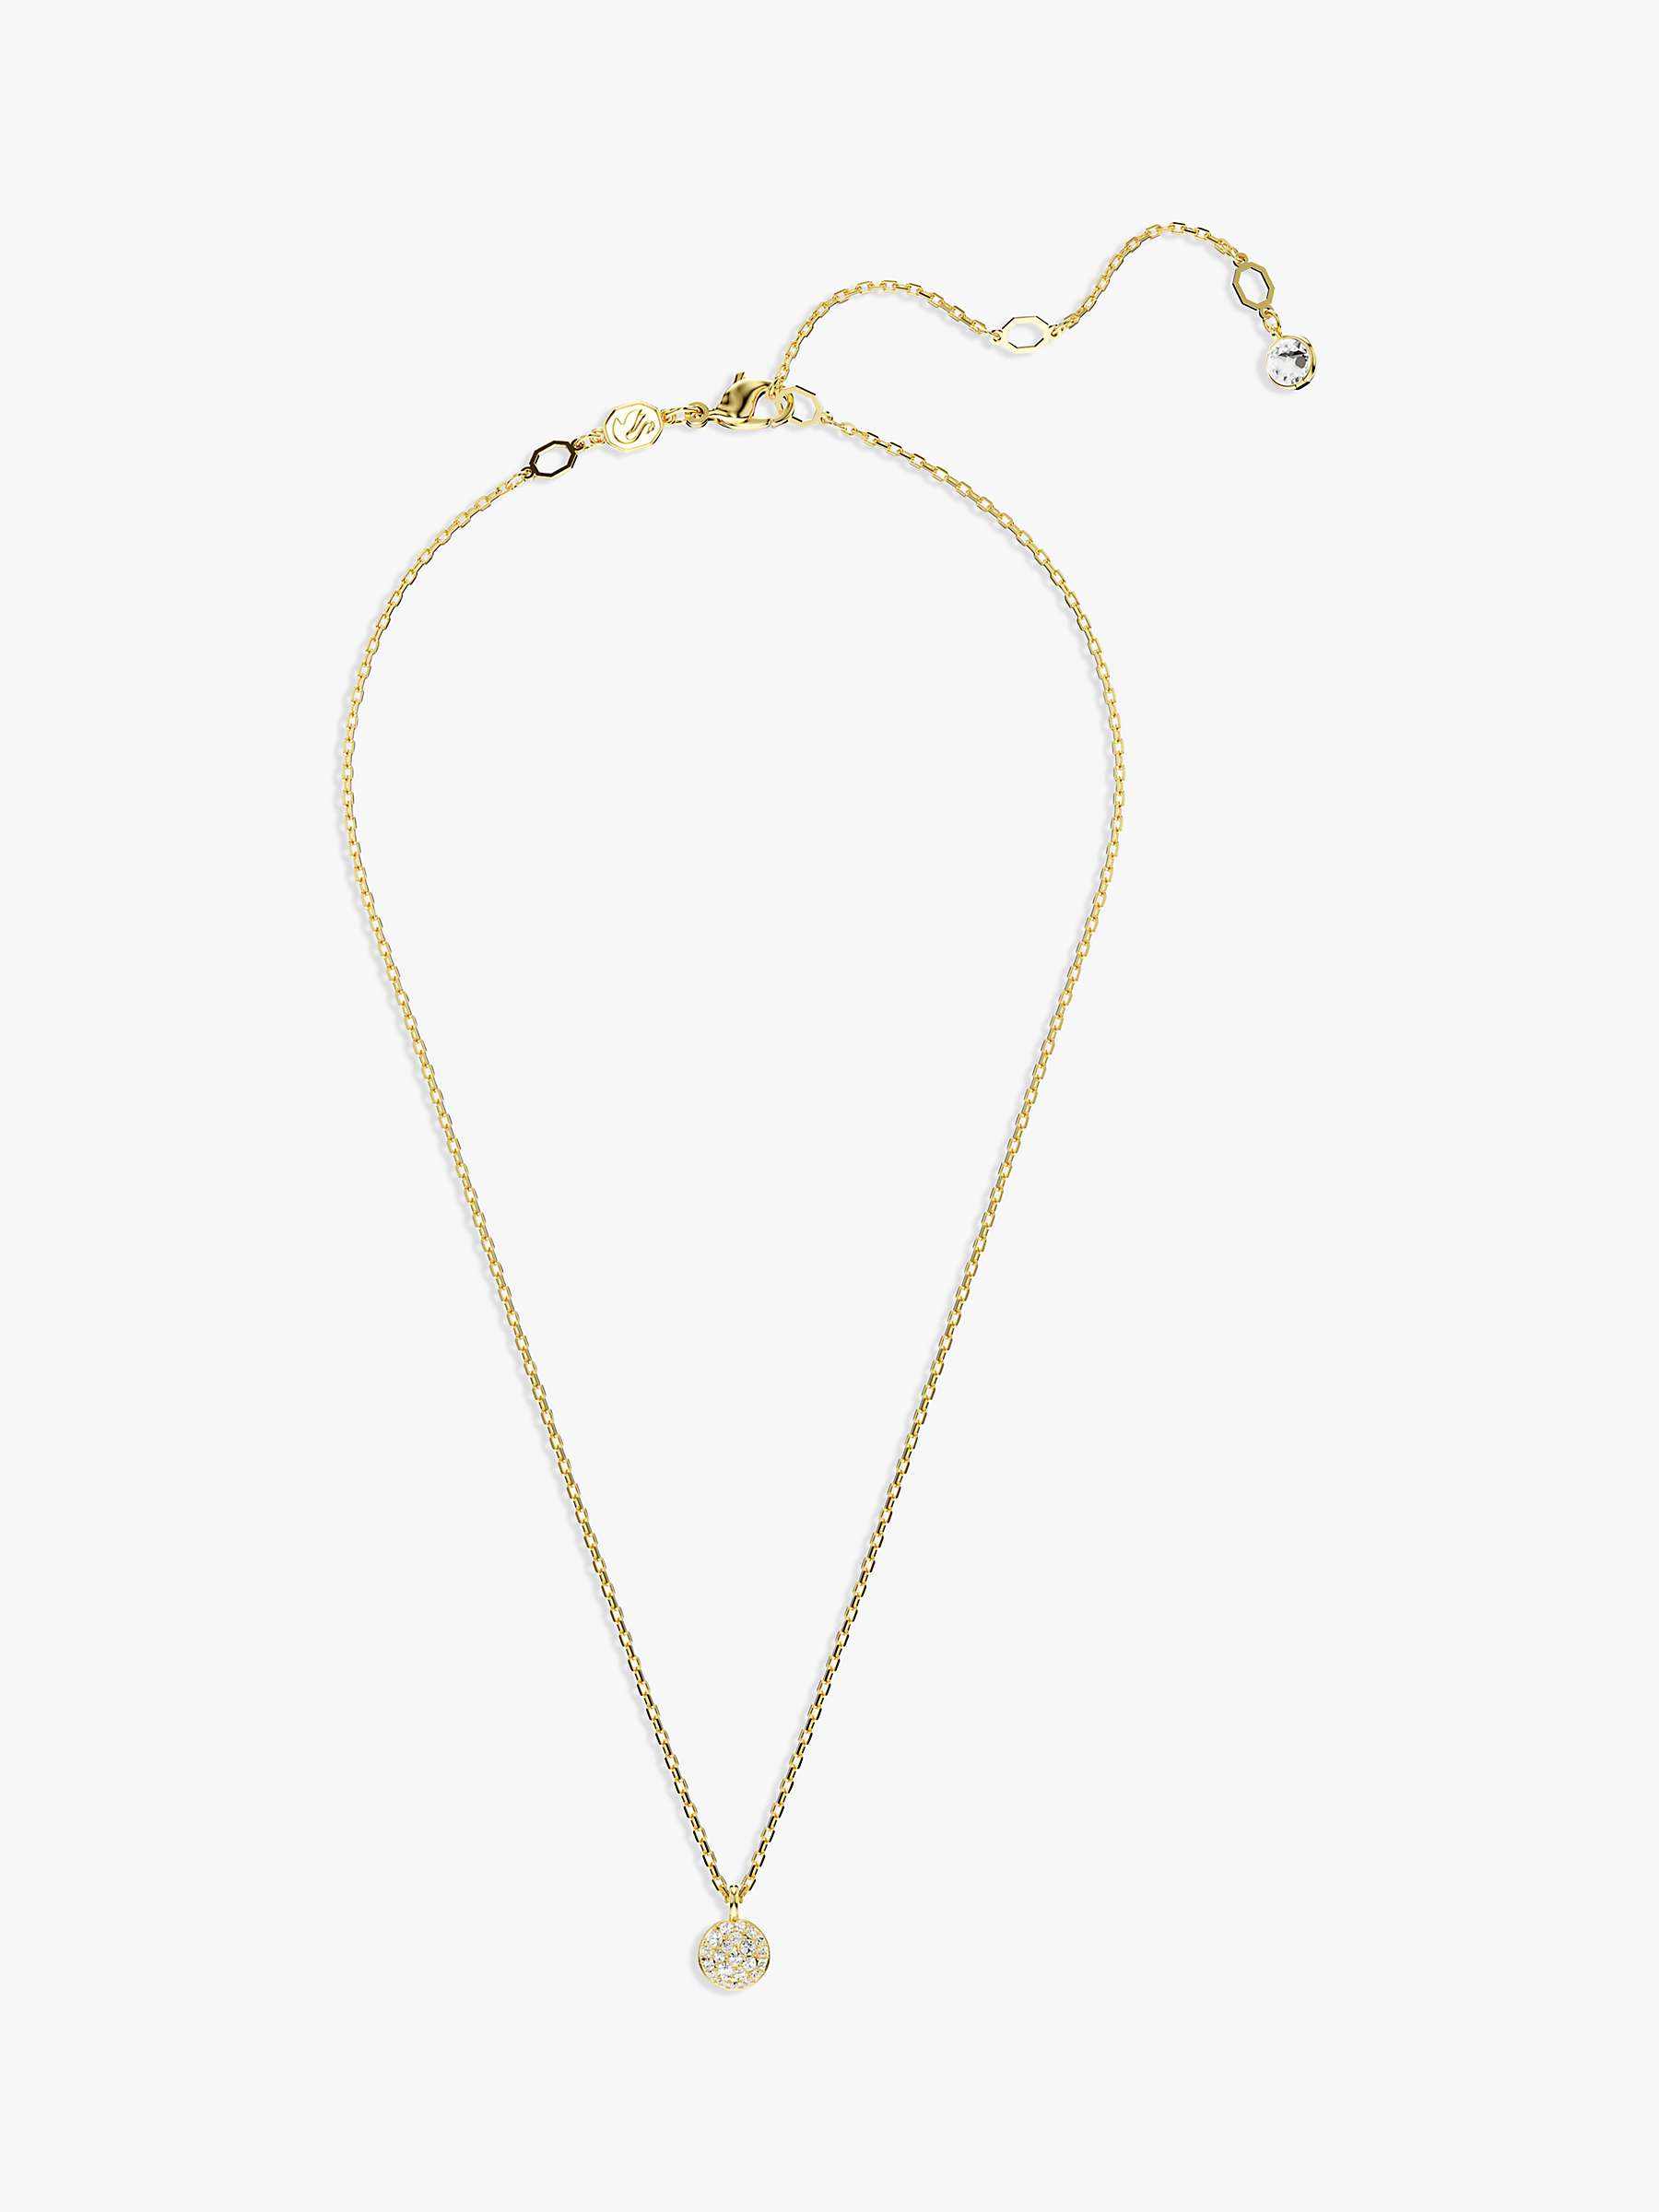 Buy Swarovski Meteora Double Chain Pave Crystal Pendant Necklace Online at johnlewis.com